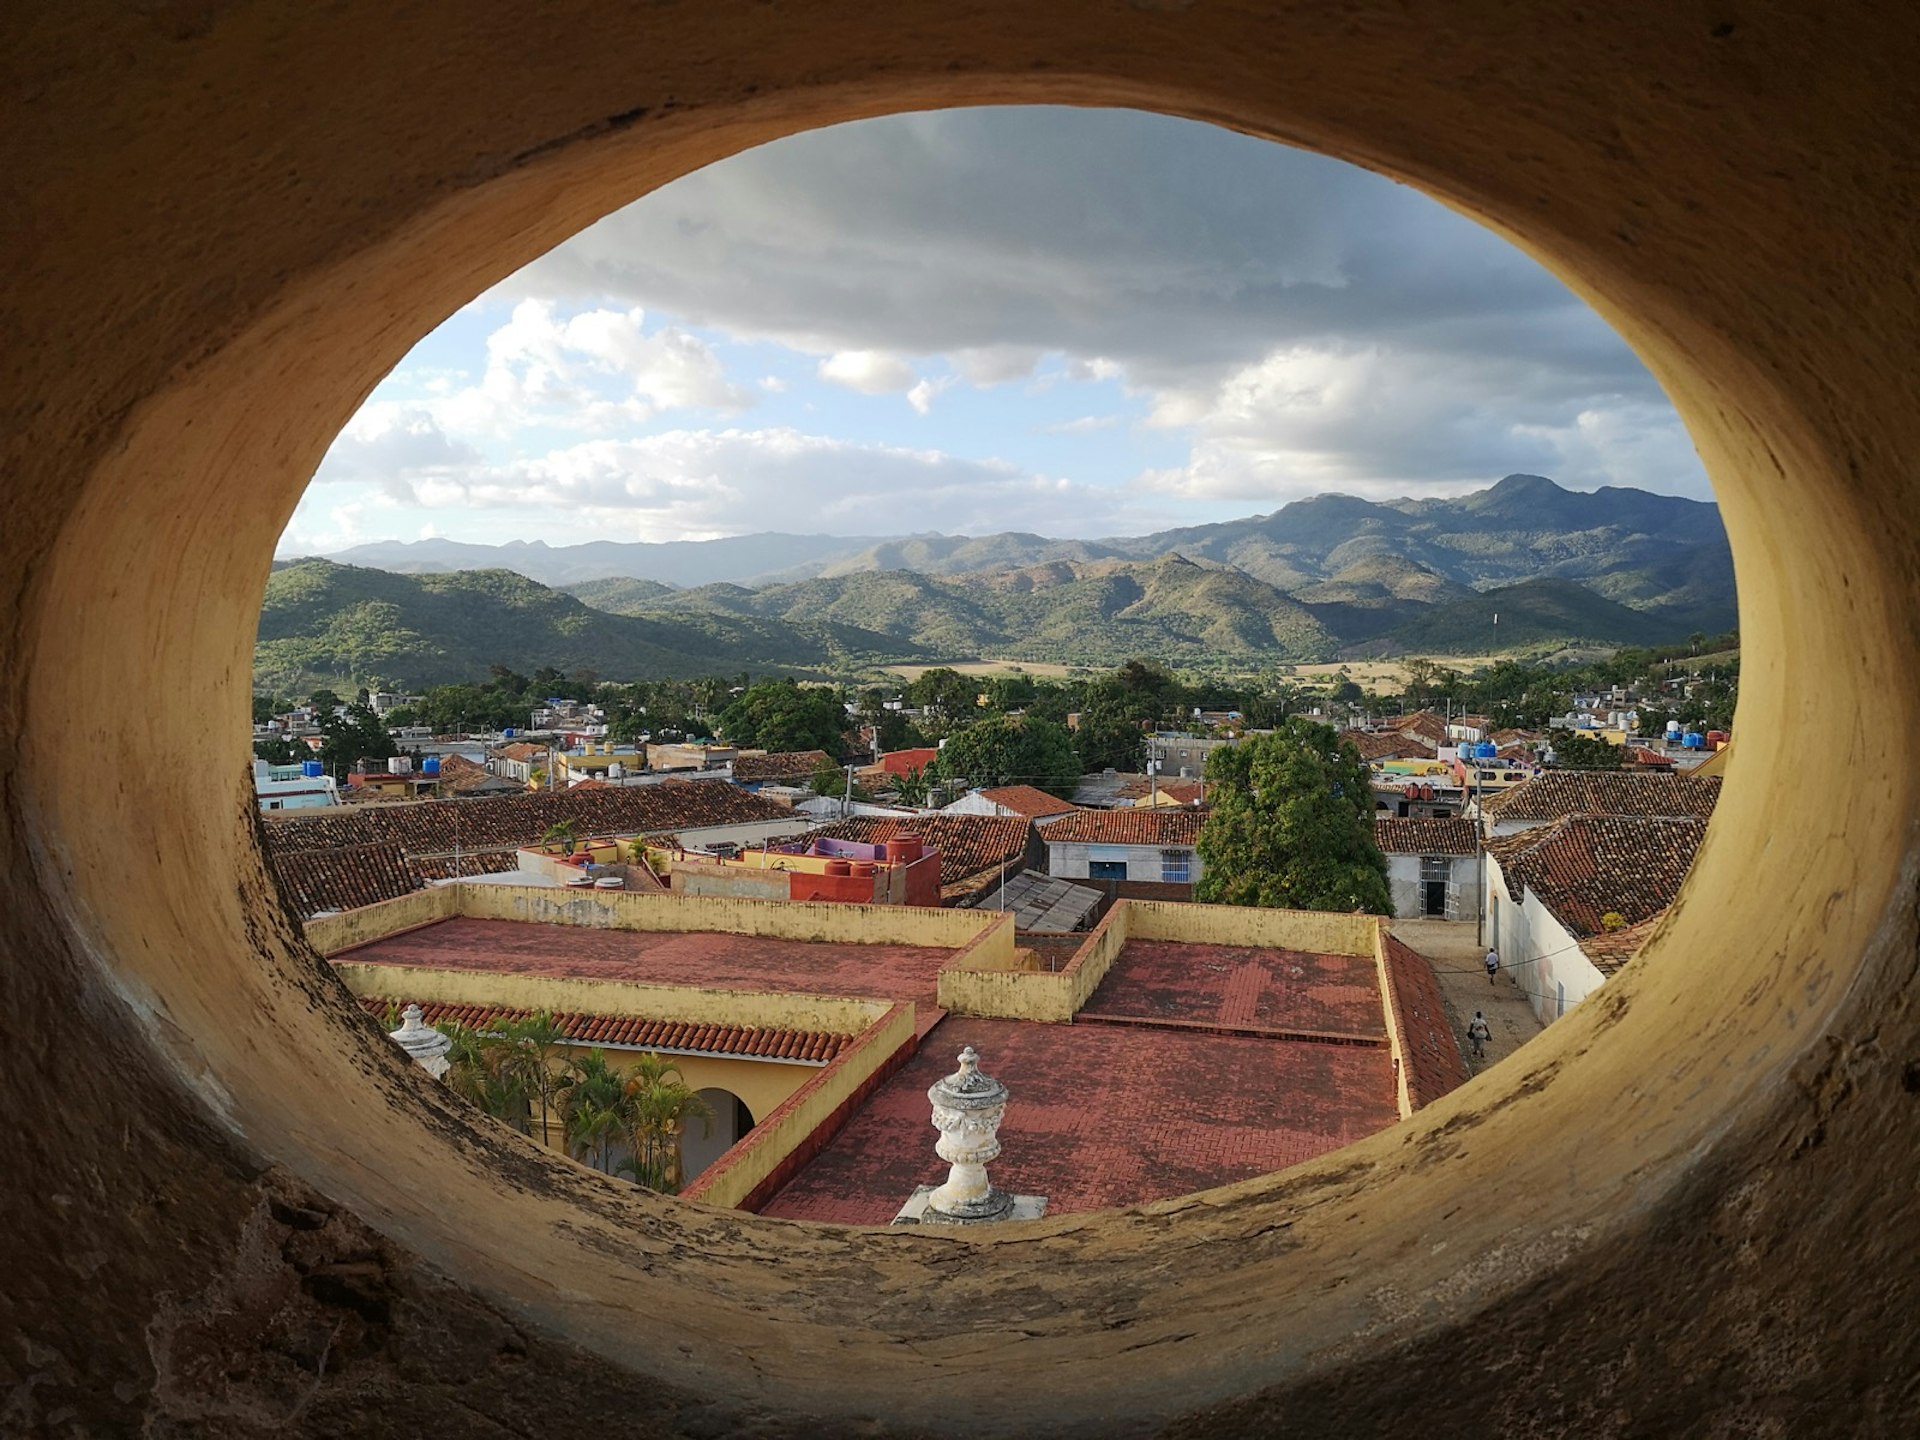 The red tiled-roofs of homes in Trinidad, Cuba, with a series of green mountains in the background 